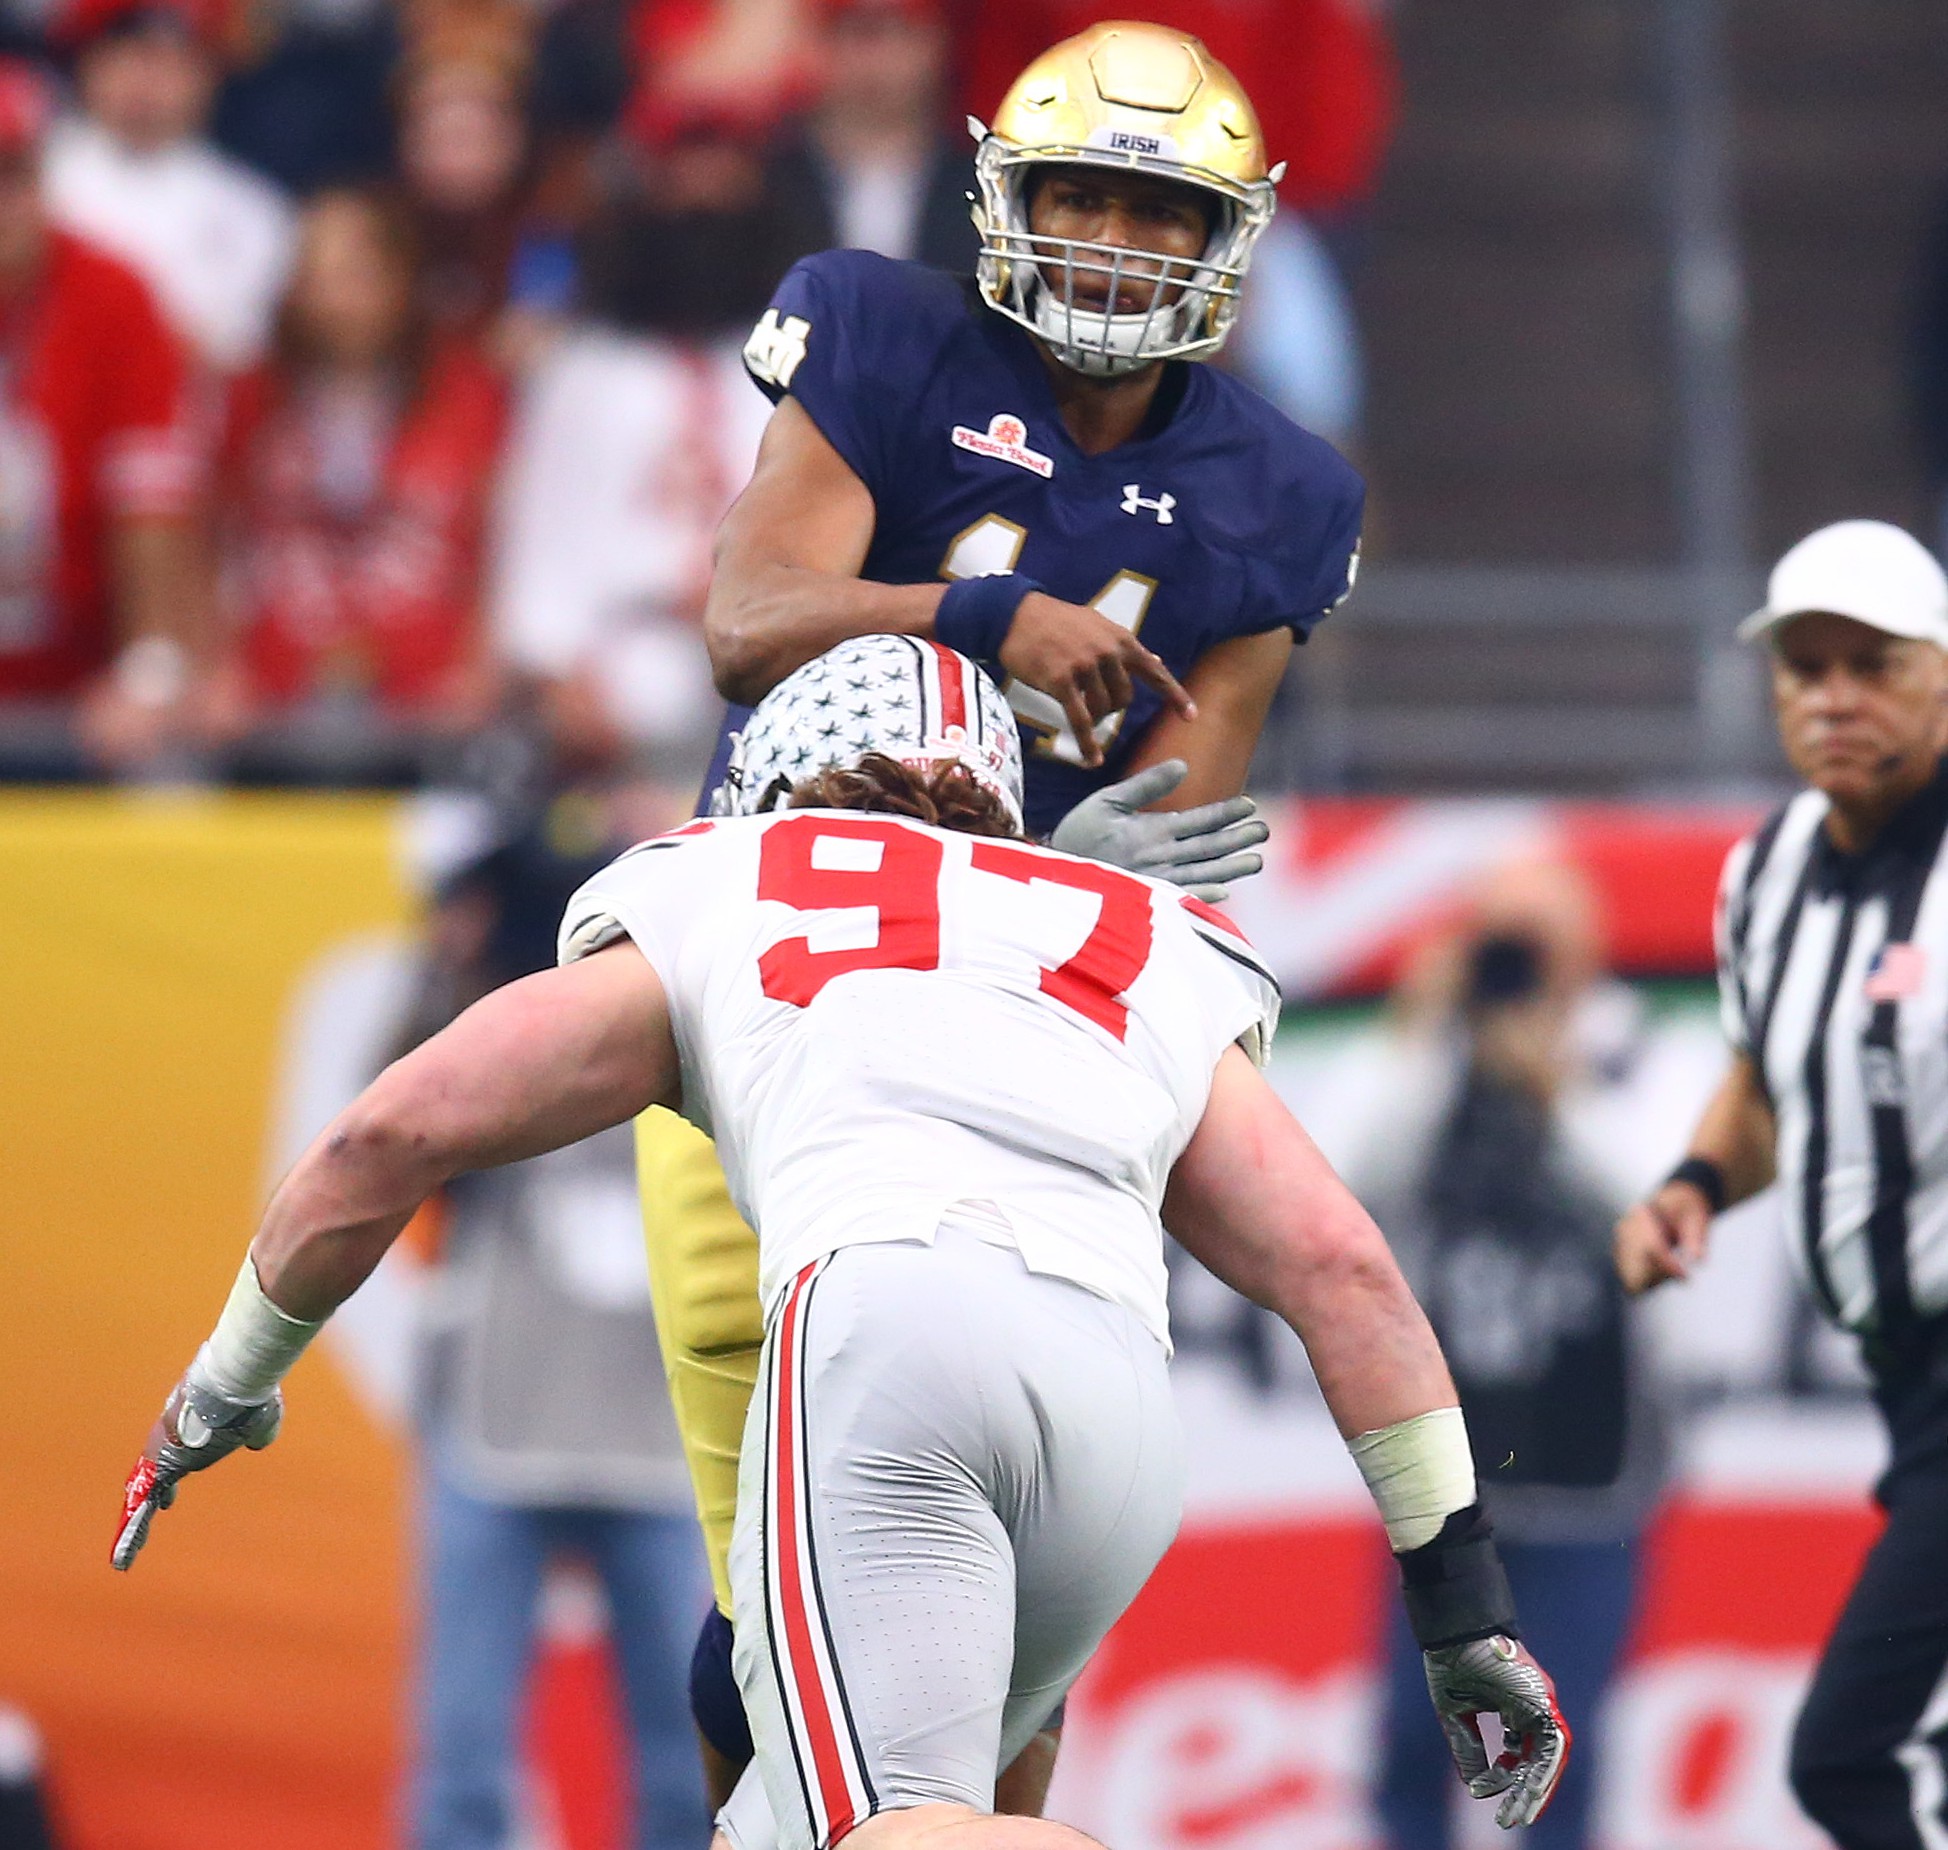 Ohio State star Bosa ejected from Fiesta Bowl for targeting